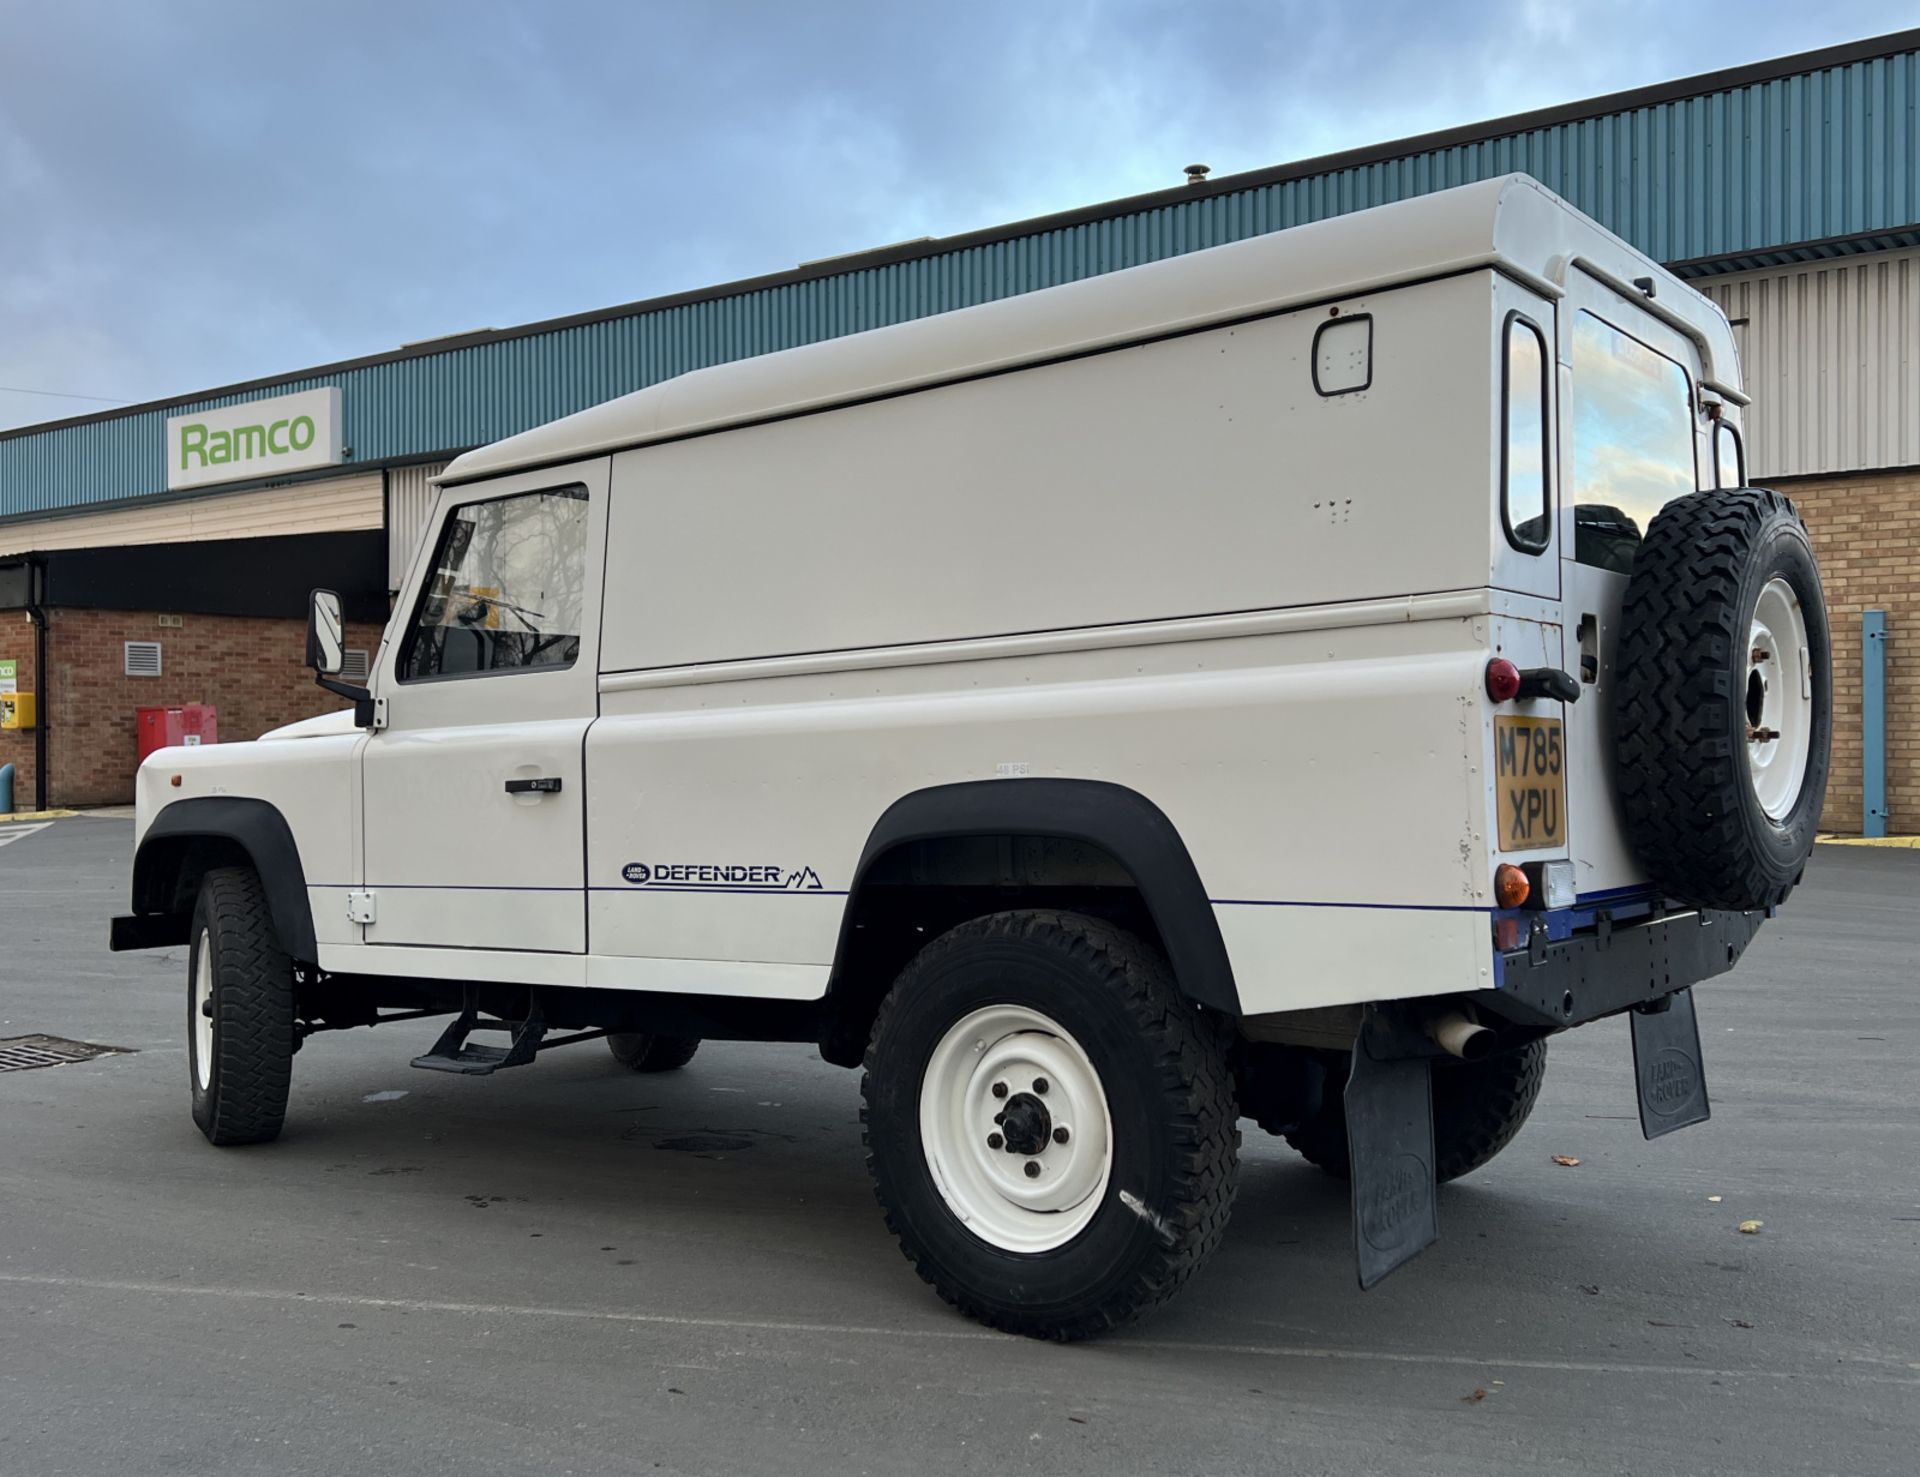 Land Rover Defender 110TDI - 1995 - Very low mileage at 24095 miles - 2.5L diesel - white - Image 5 of 49